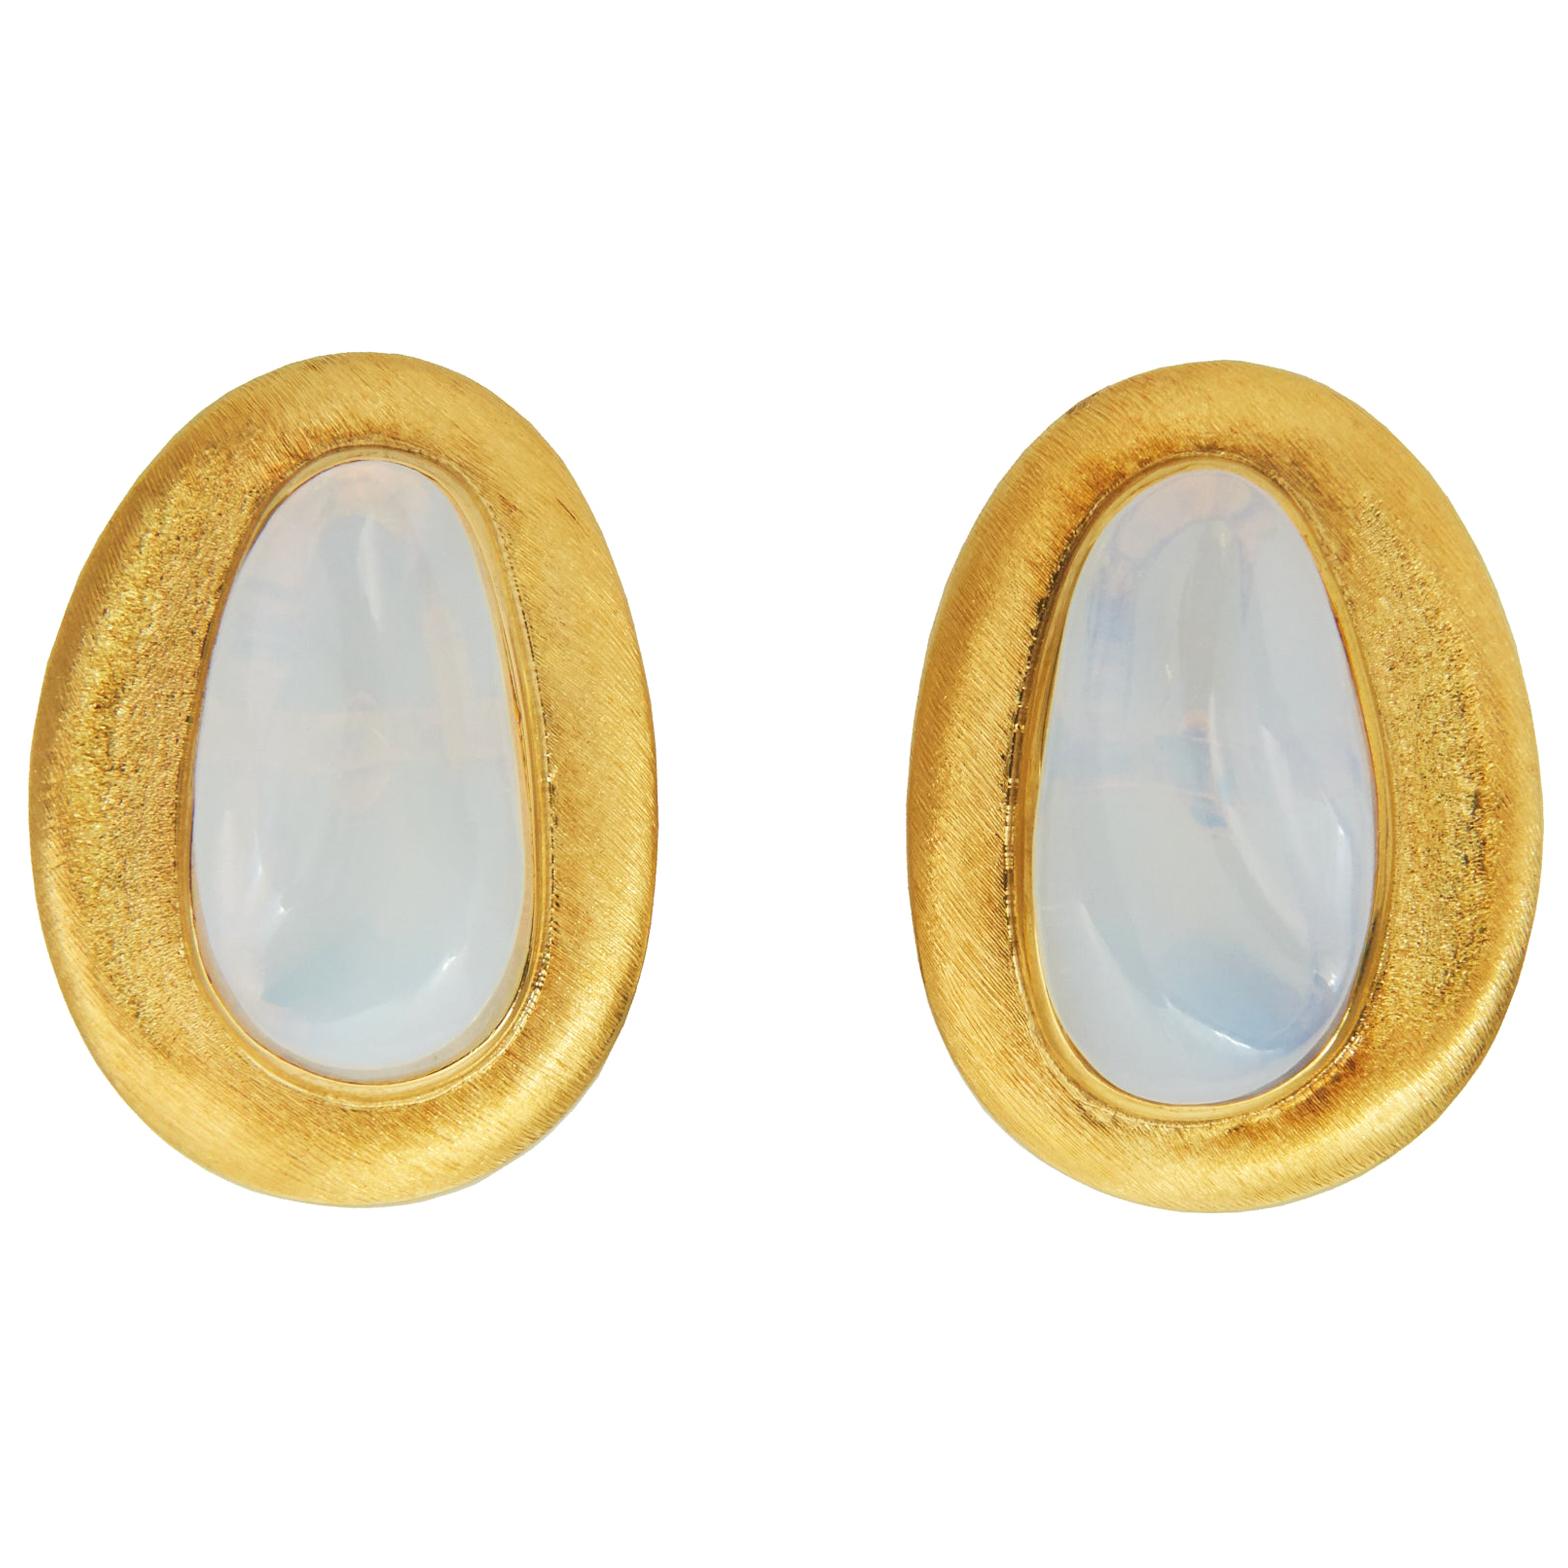 c. 1970 Burle Marx Forma Livre Moonstone and Gold Earrings